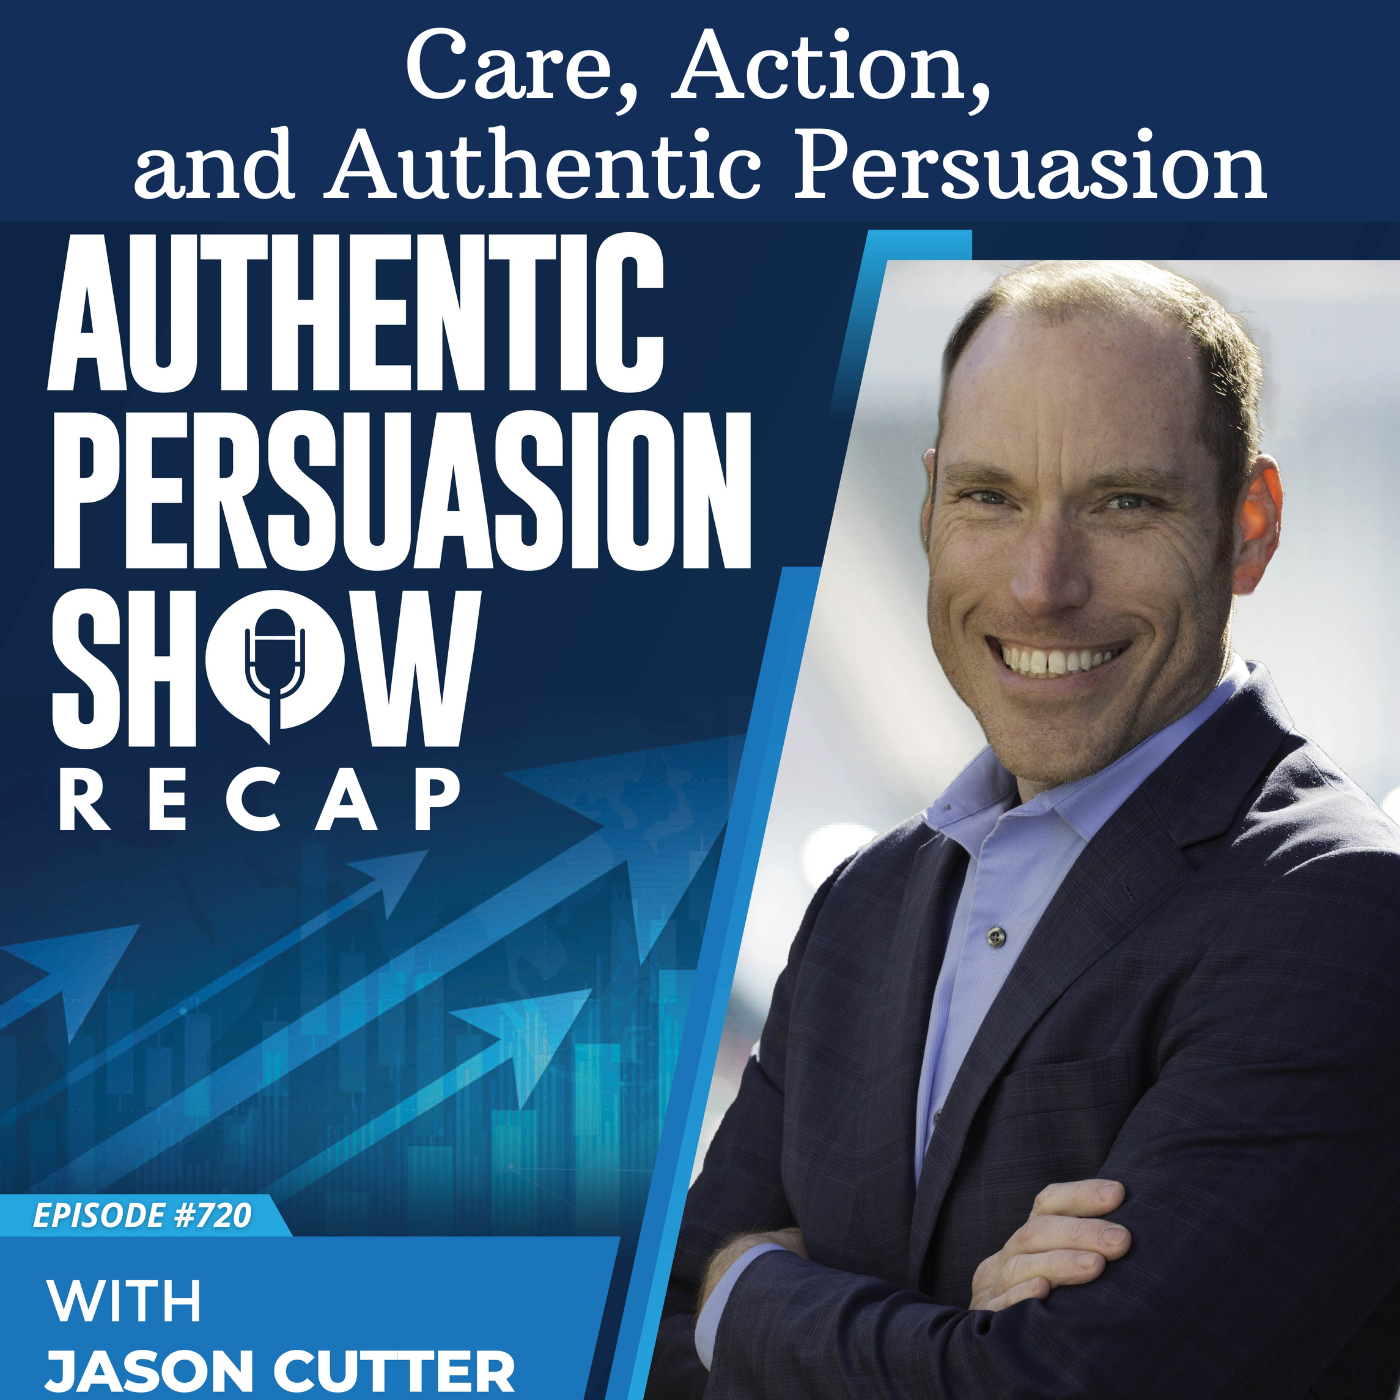 [720] Care, Action, and Authentic Persuasion